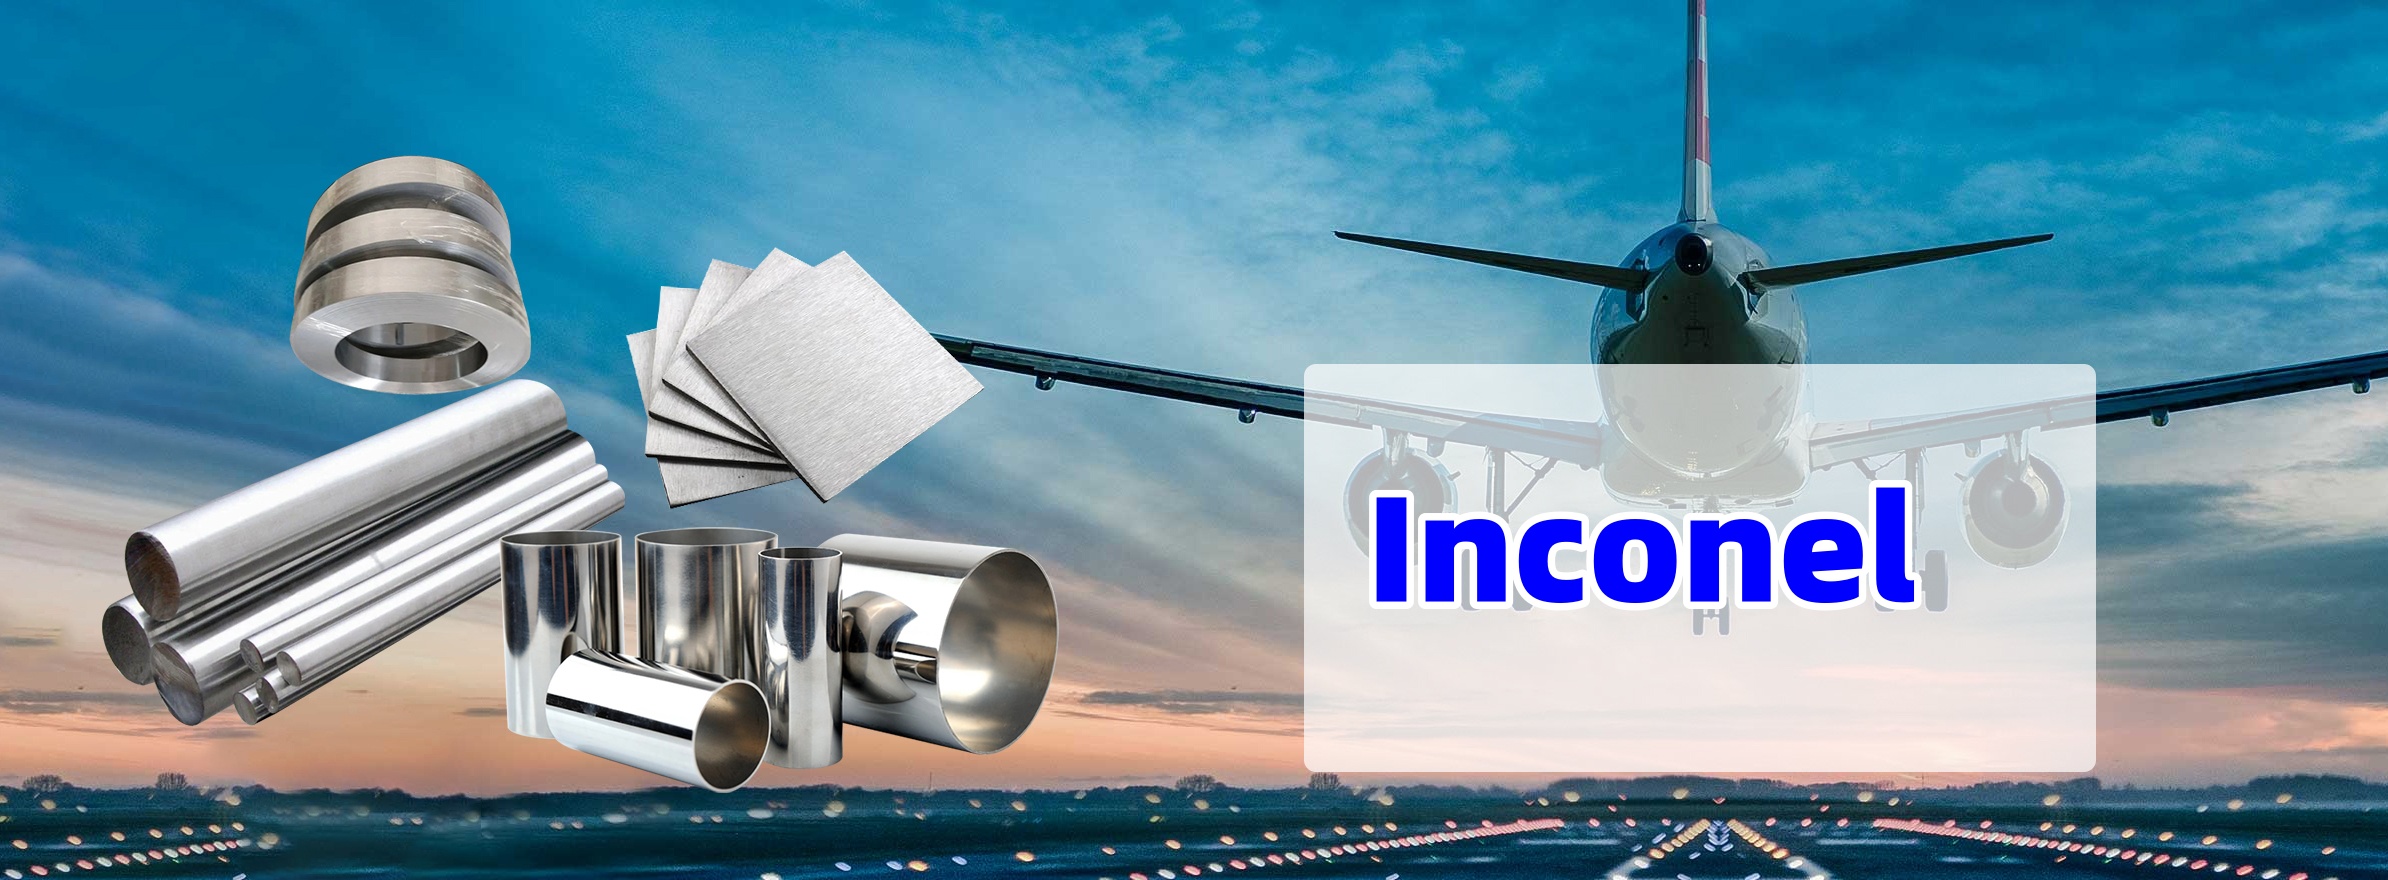 Inconel uses in the aerospace industry